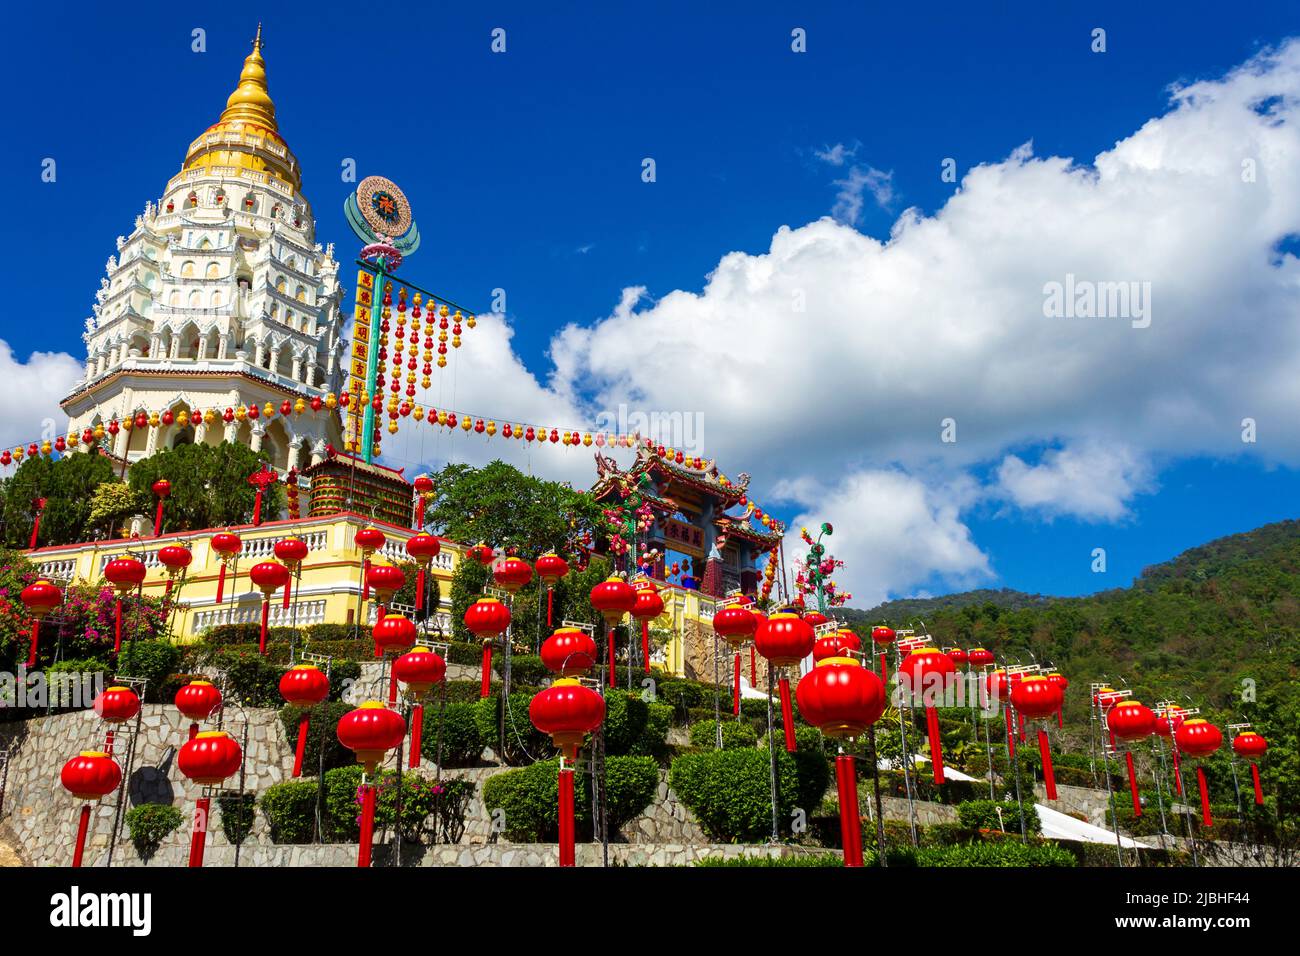 Kek Lok Si Chinese Temple decorated with Chinese paper lanterns for the Chinese New Year. Kek Lok Si Temple is located near Georgetown, Penang, Malays Stock Photo